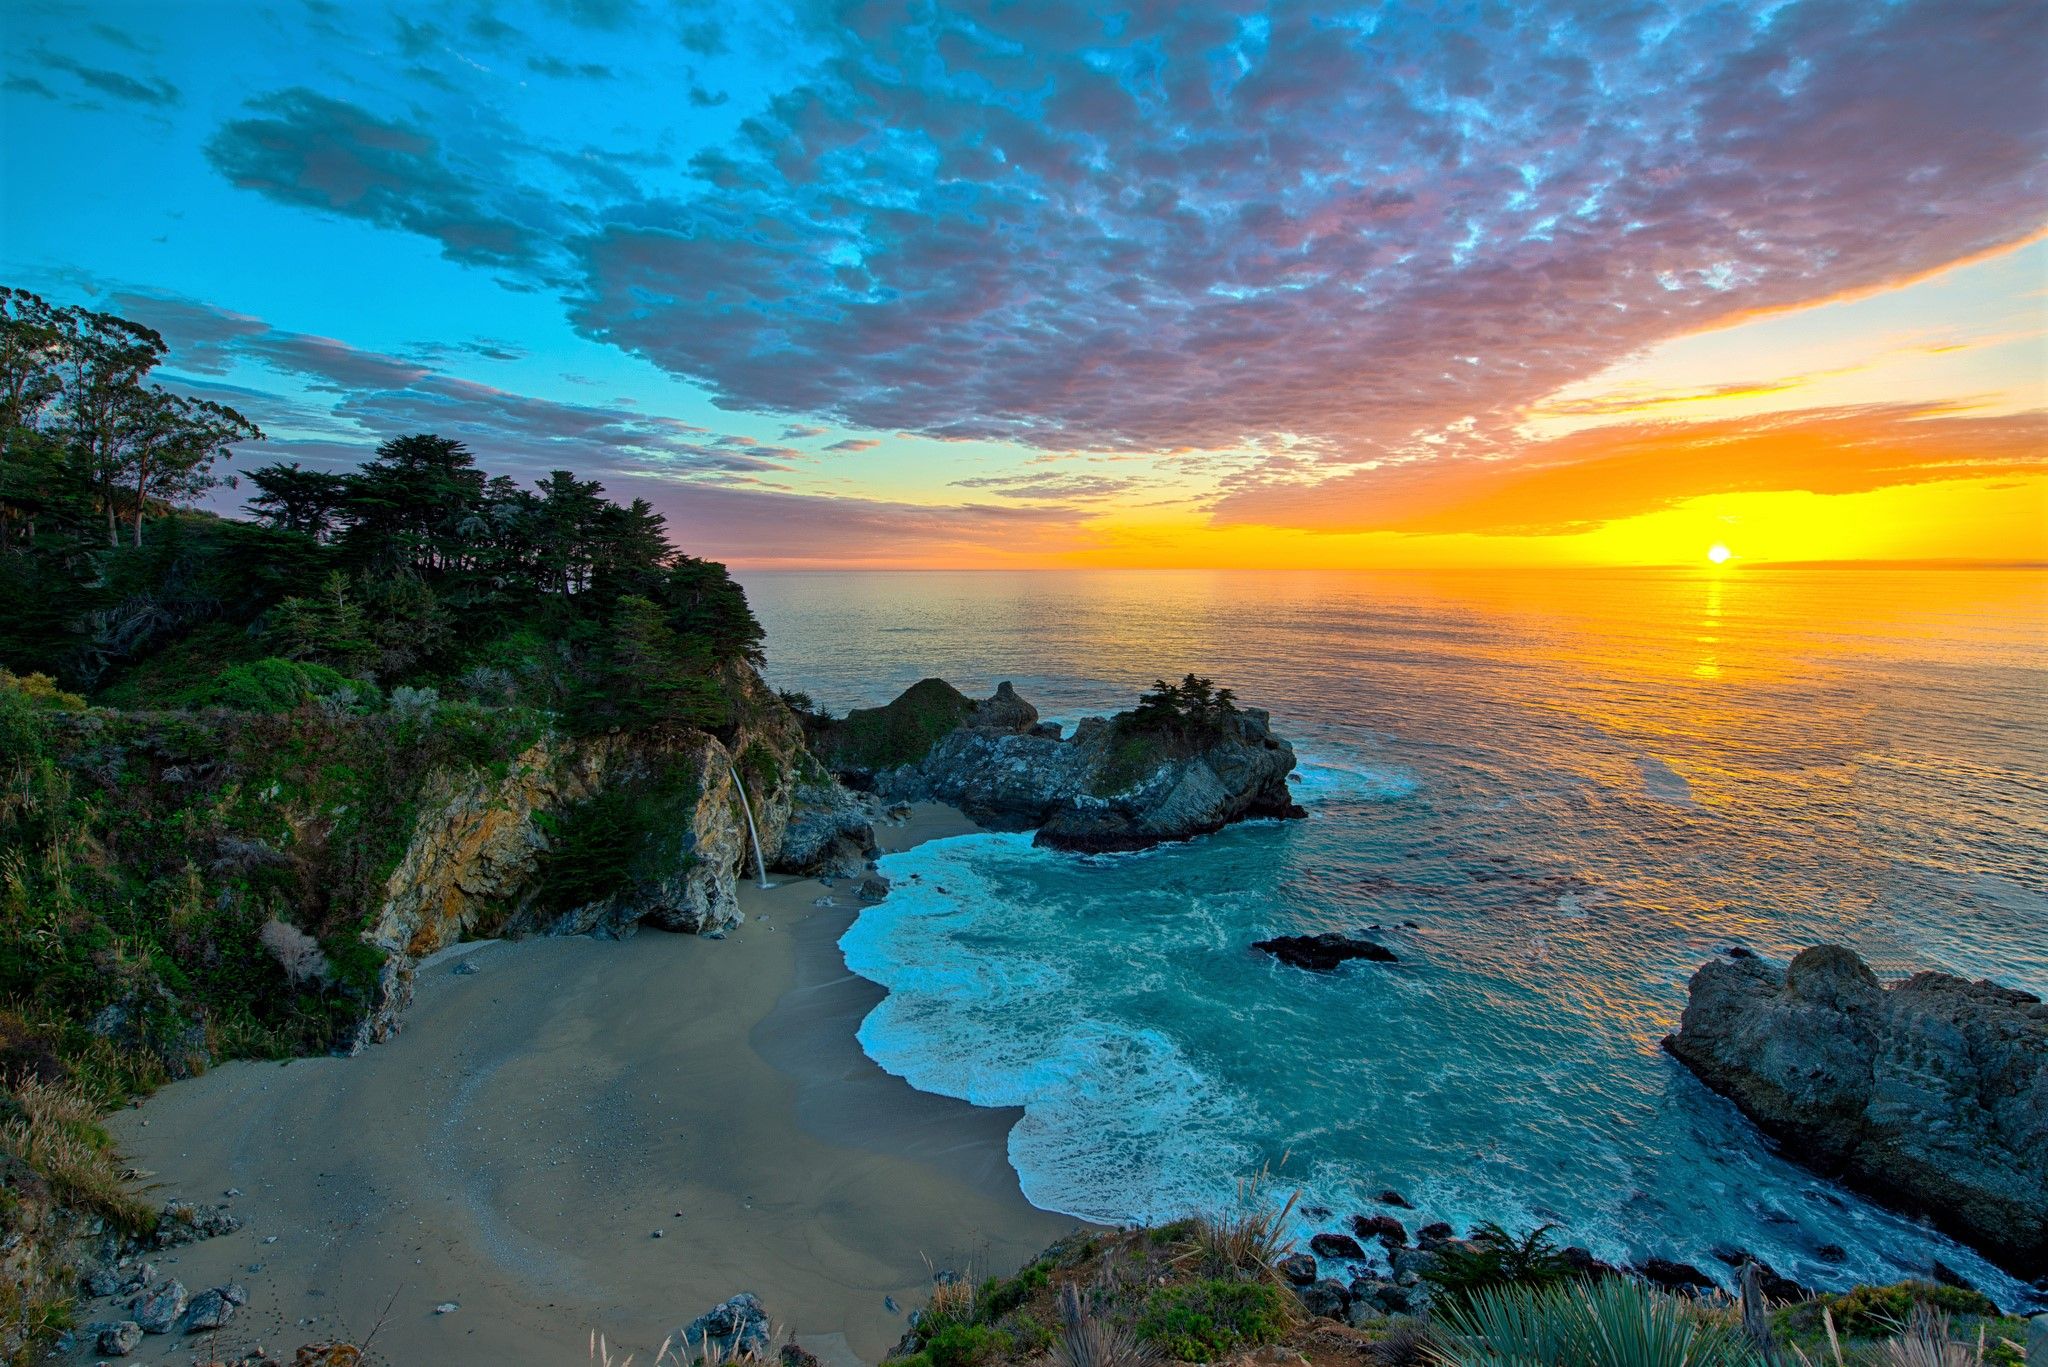 Sunset over McWay Falls in California HD Wallpaper. Background